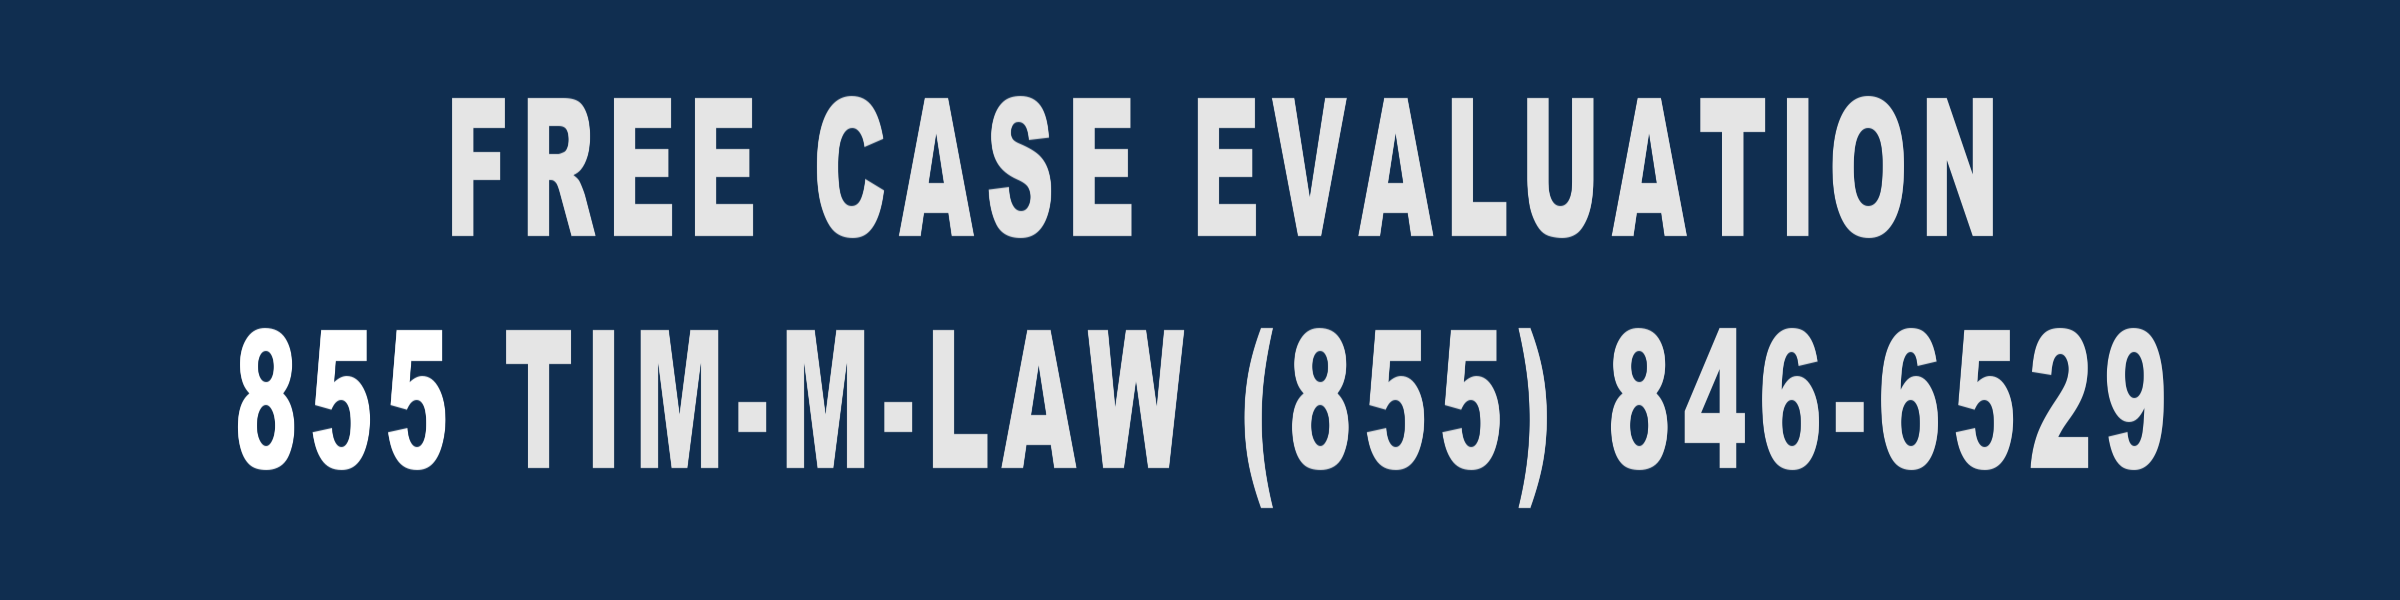 Attorney ad for free case evaluation.